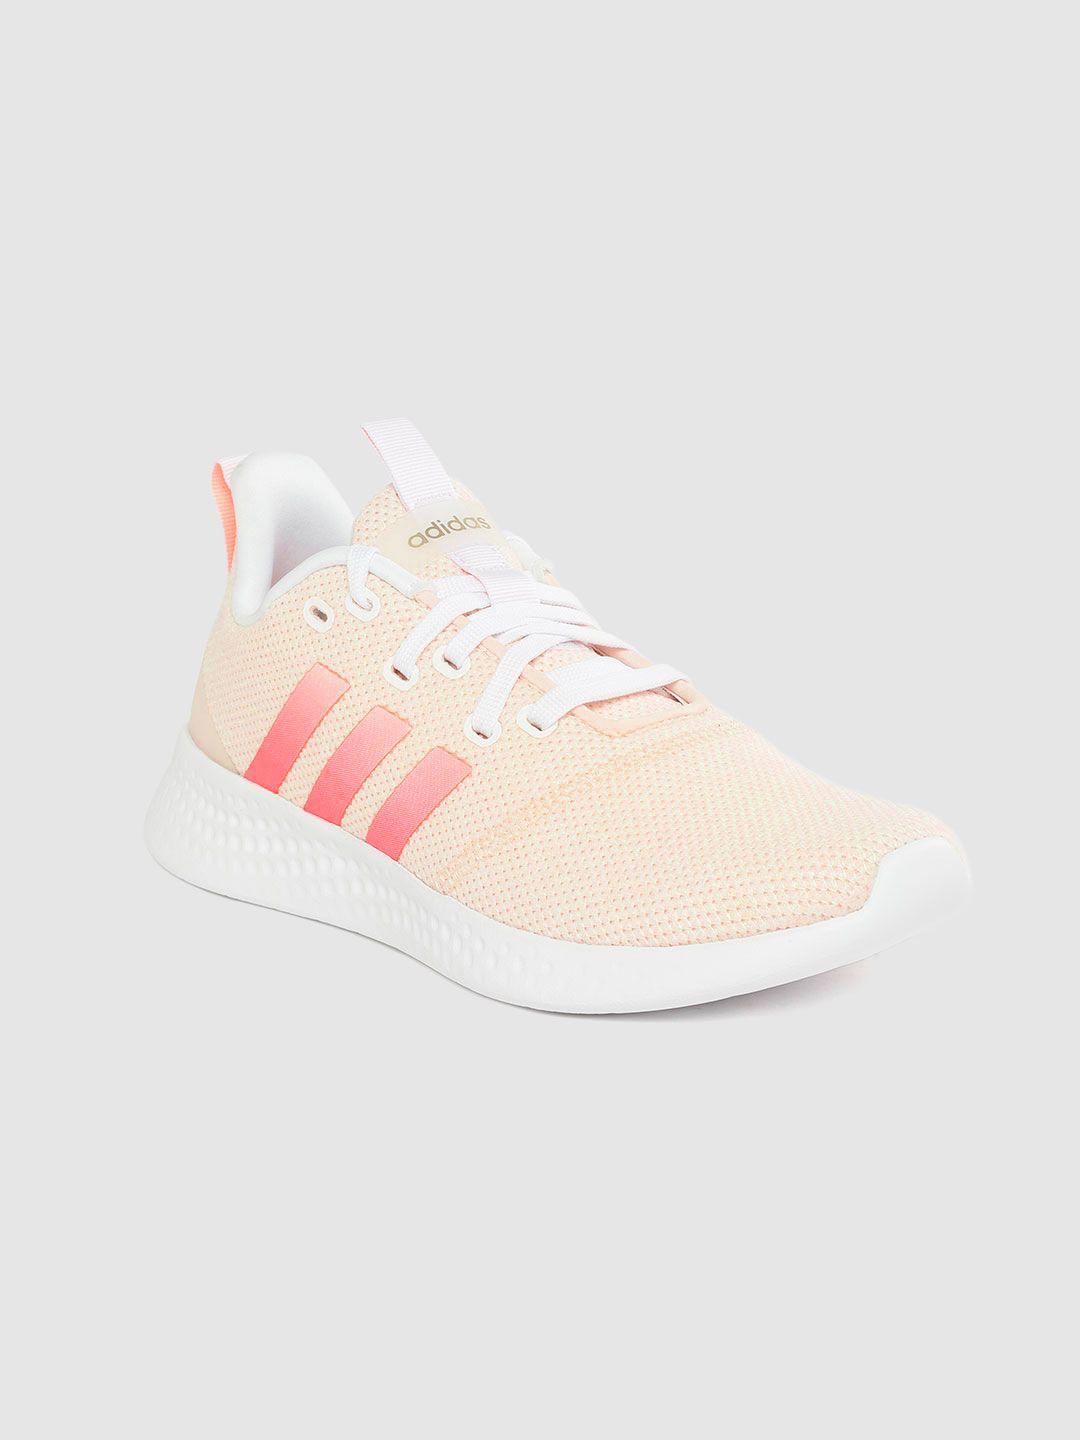 adidas-women-peach-coloured-solid-pure-motion-running-shoes